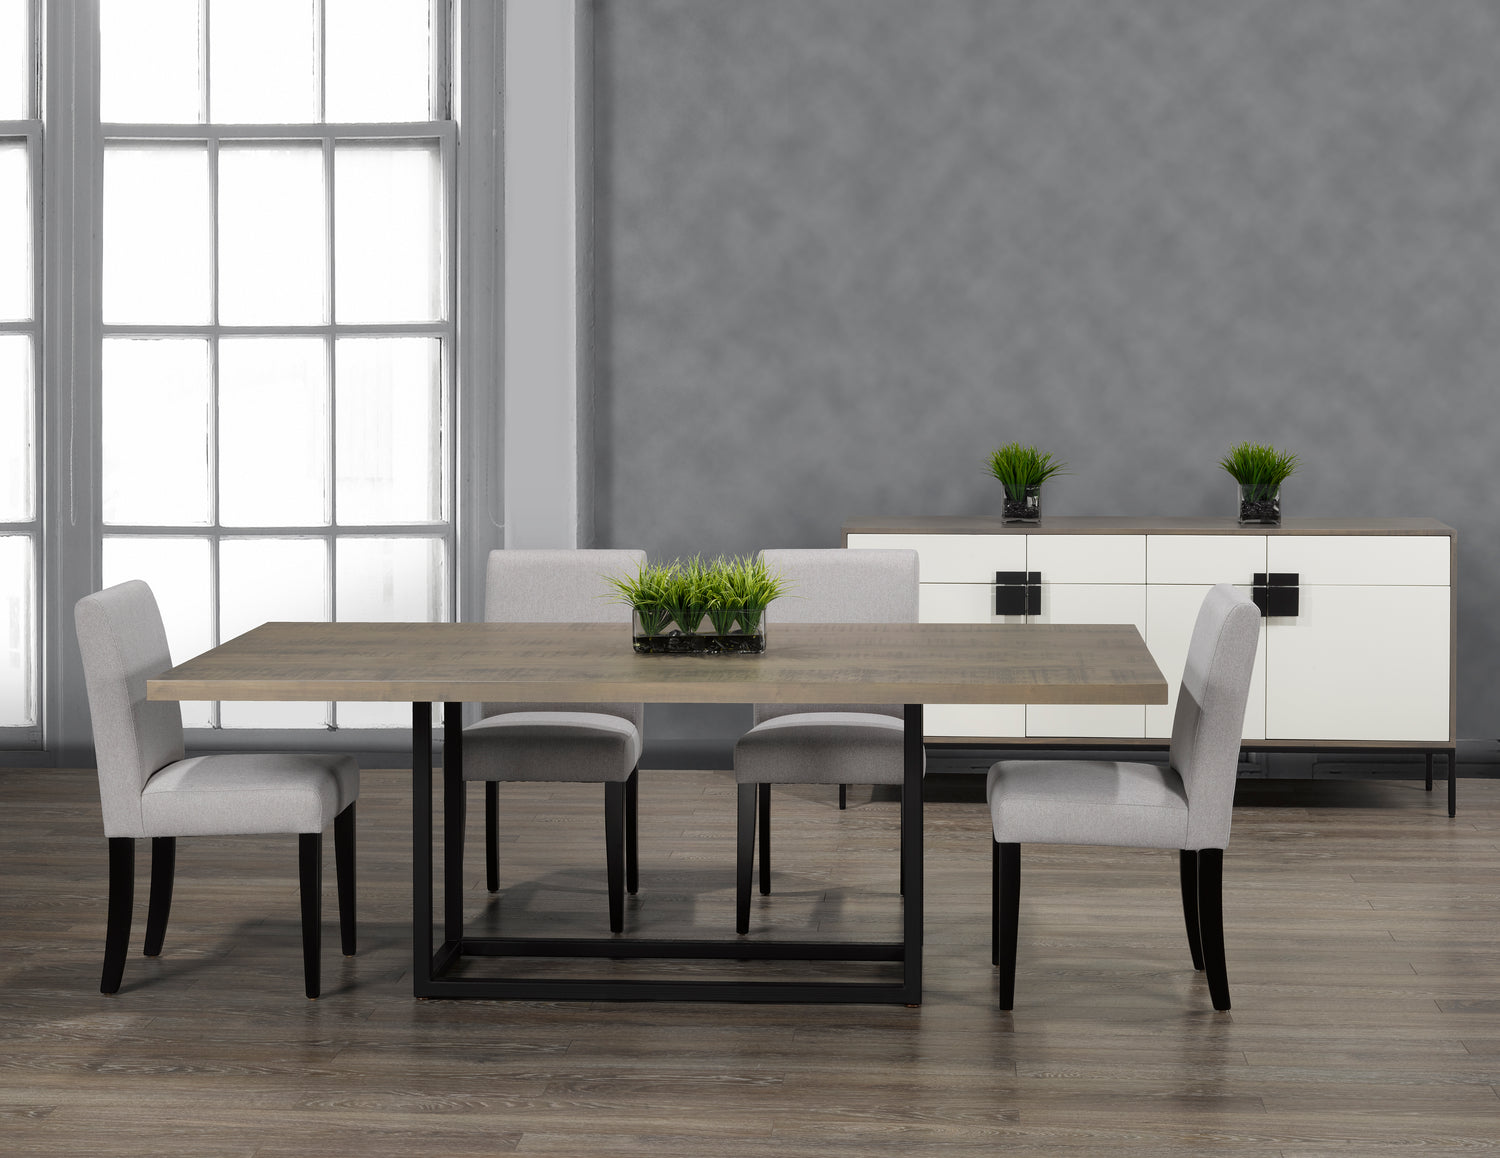 Table as Shown | Cardinal Woodcraft Skien Dining Table | Valley Ridge Furniture